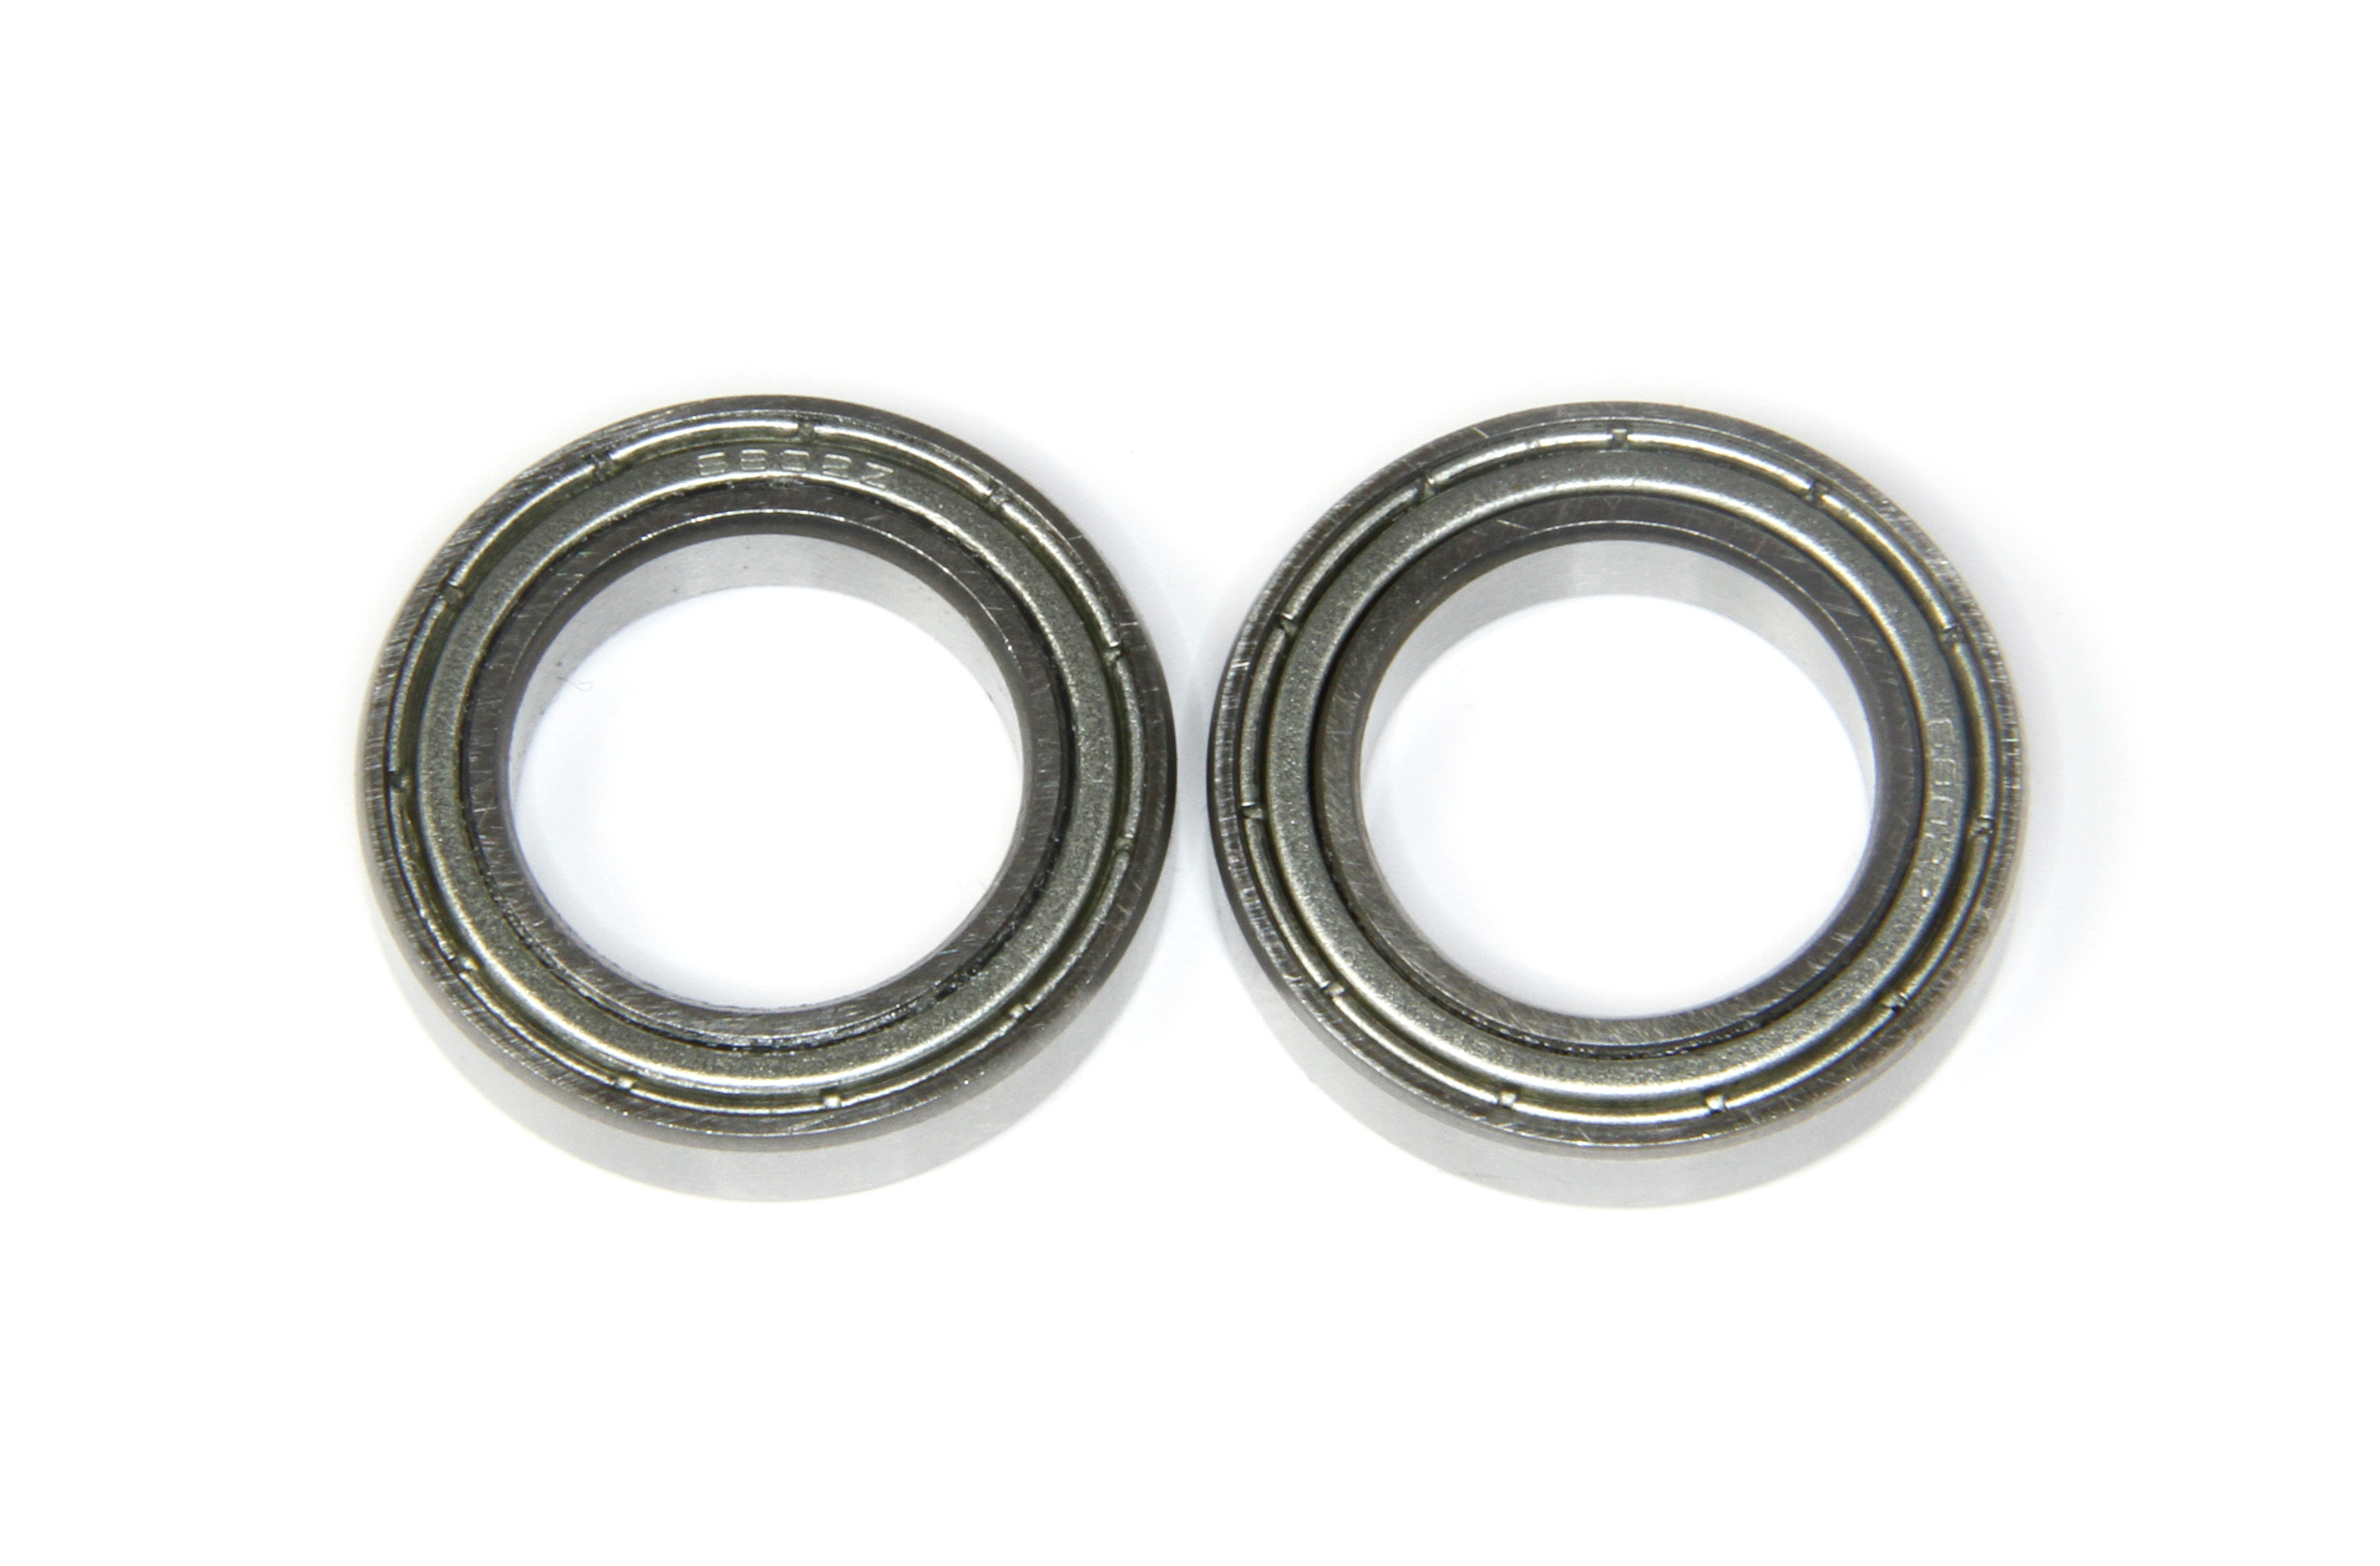 2012-175/02LL Differential low-friction ball bearing 15/24/5, set of 2